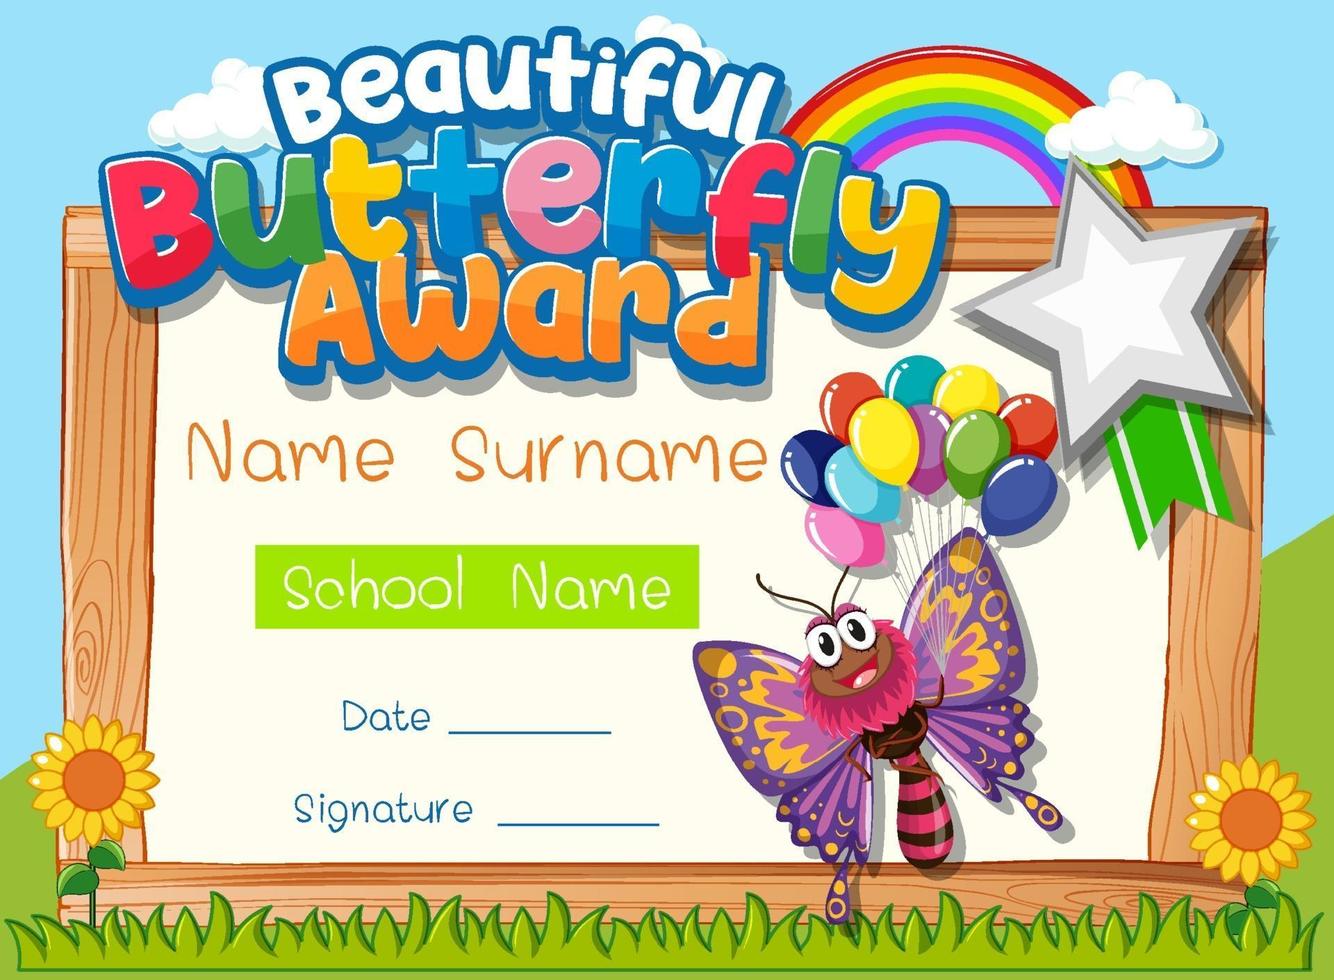 Certificate template with Beautiful Butterfly Award vector